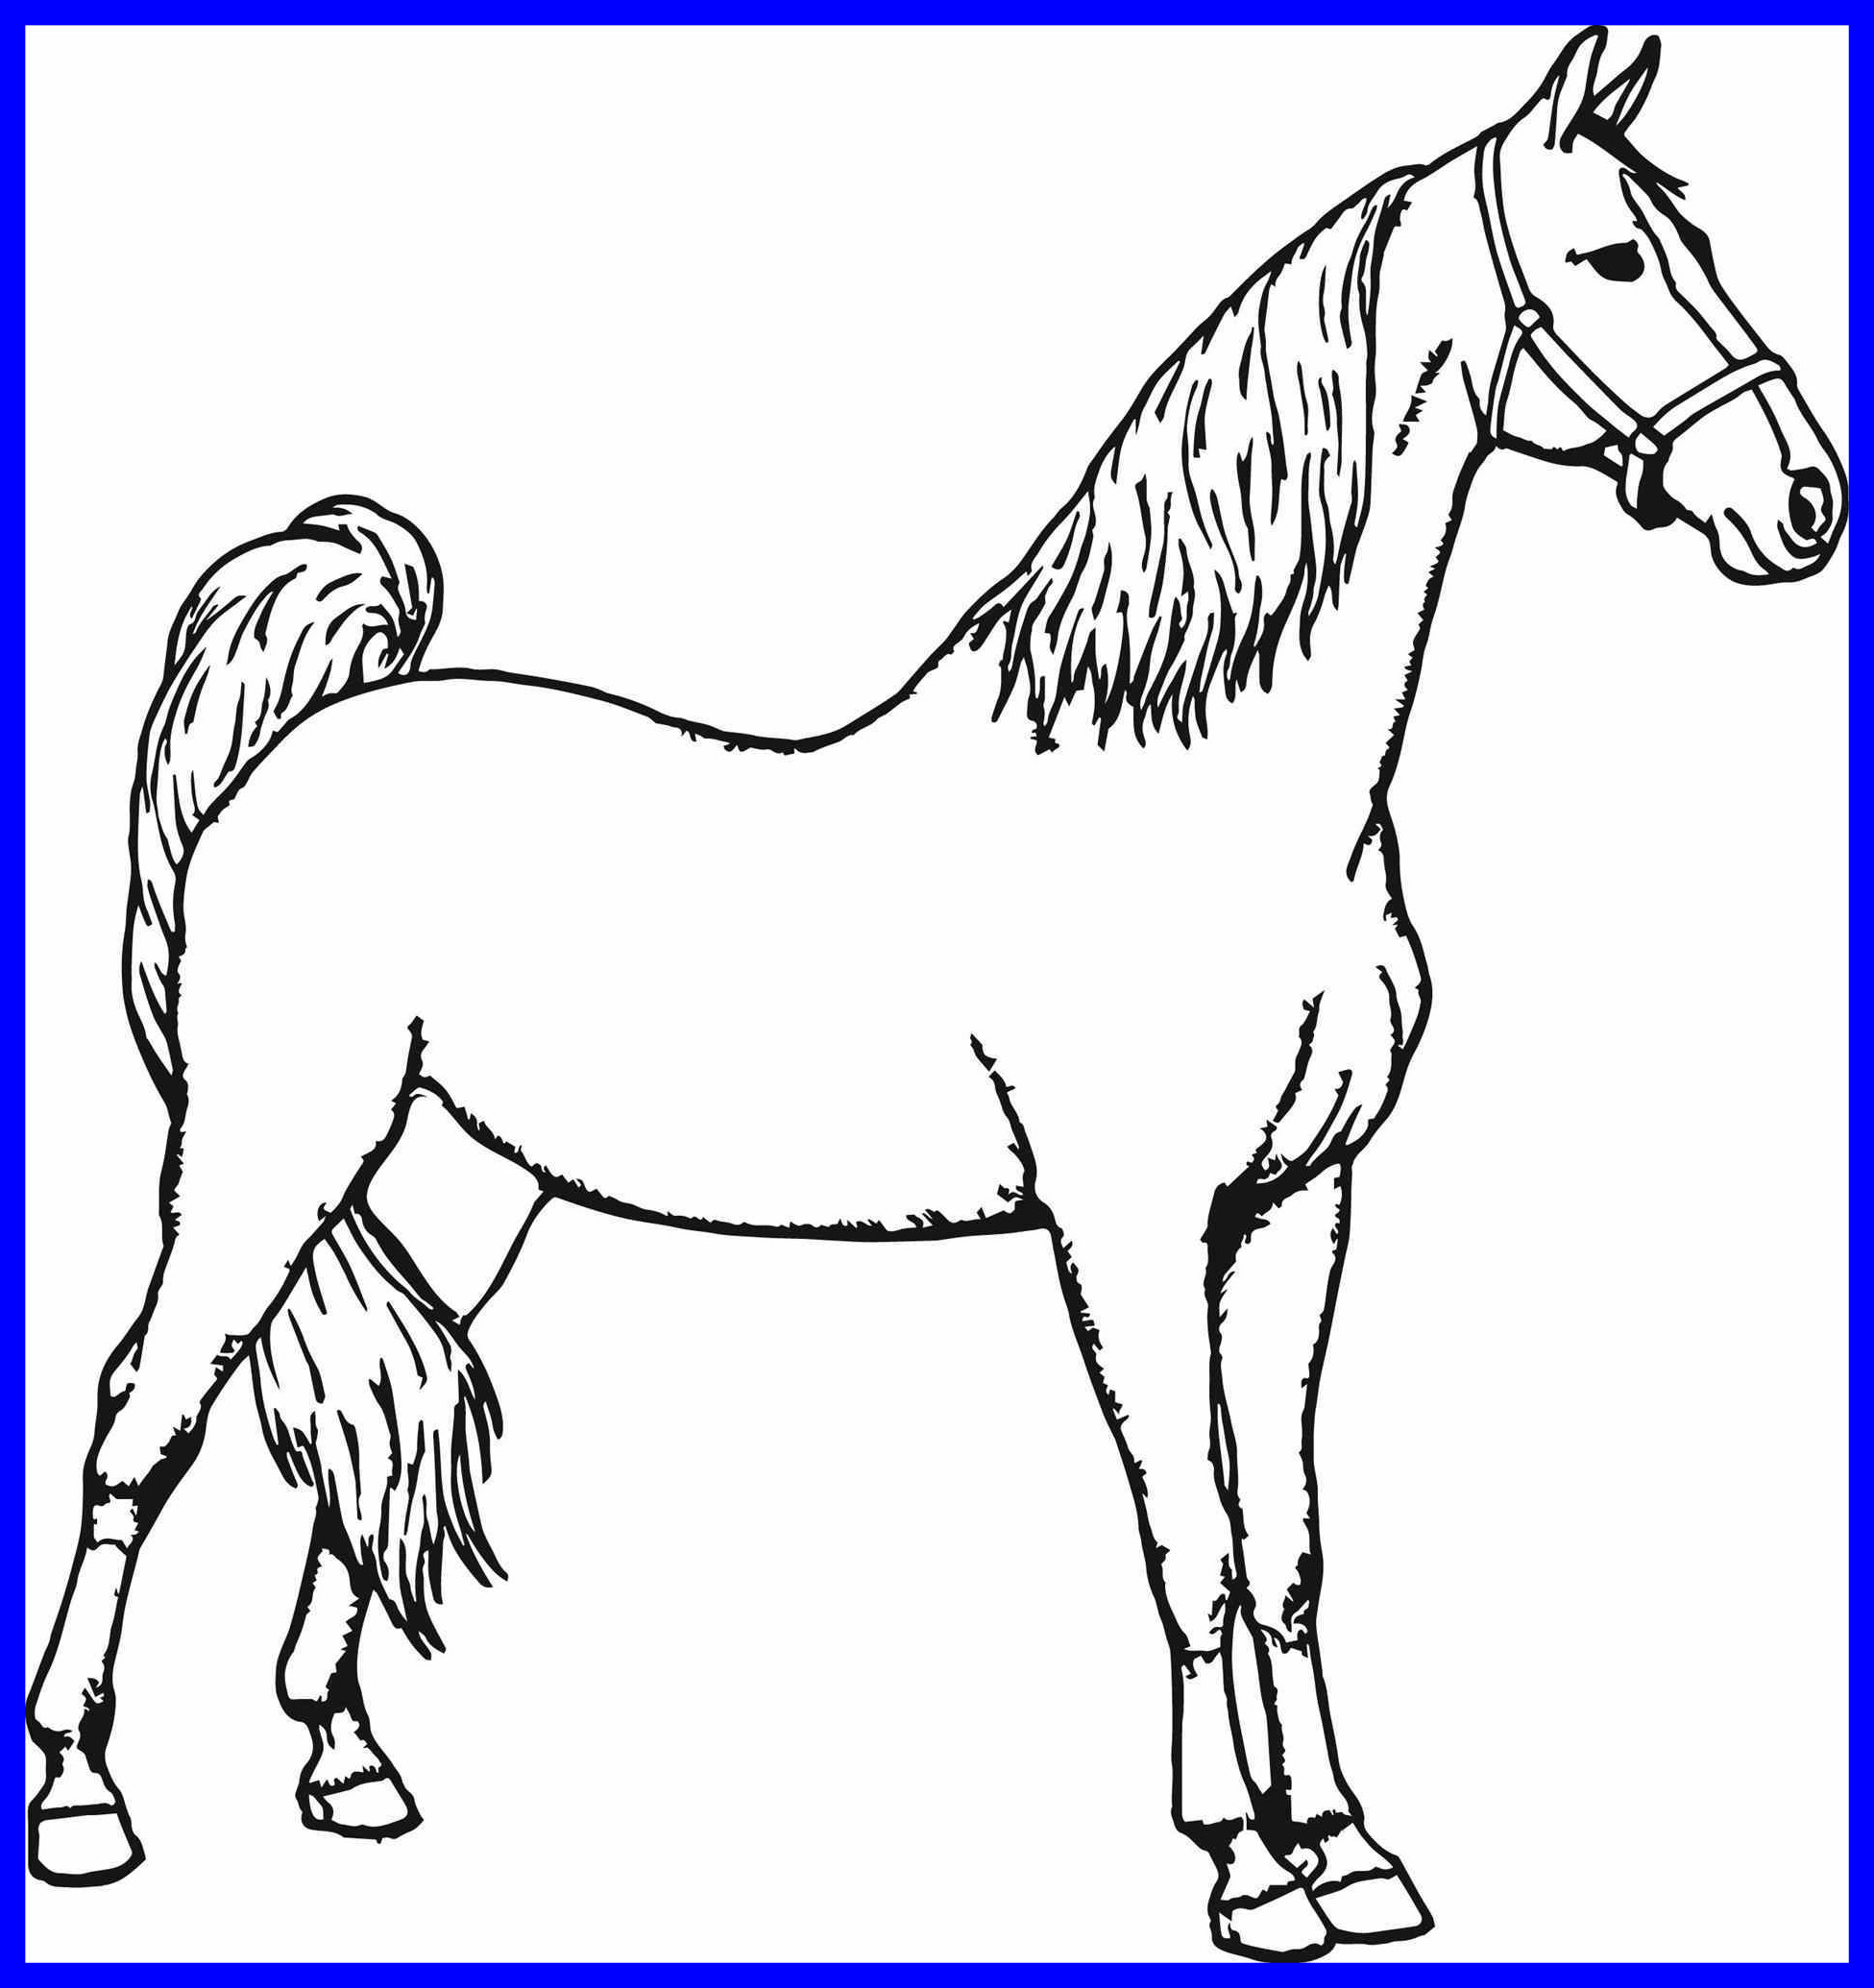 Horse Coloring Page Free Printable - Printable Templates